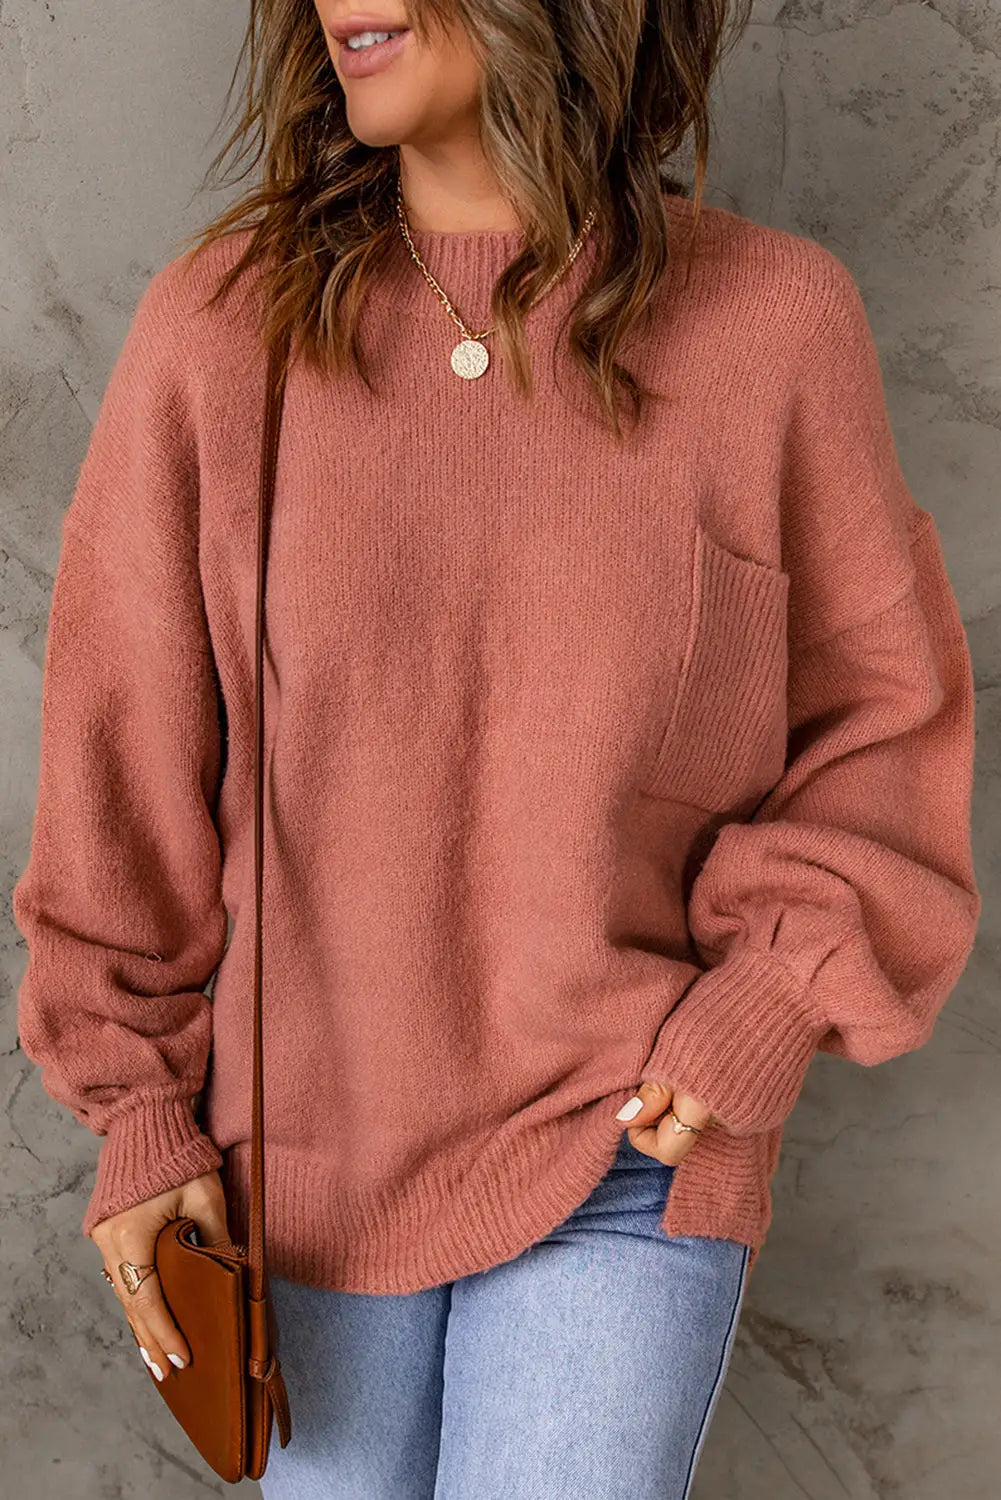 Solid color puffy sleeve pocketed sweater - red / s / 97% polyester + 3% polyamide - sweaters & cardigans